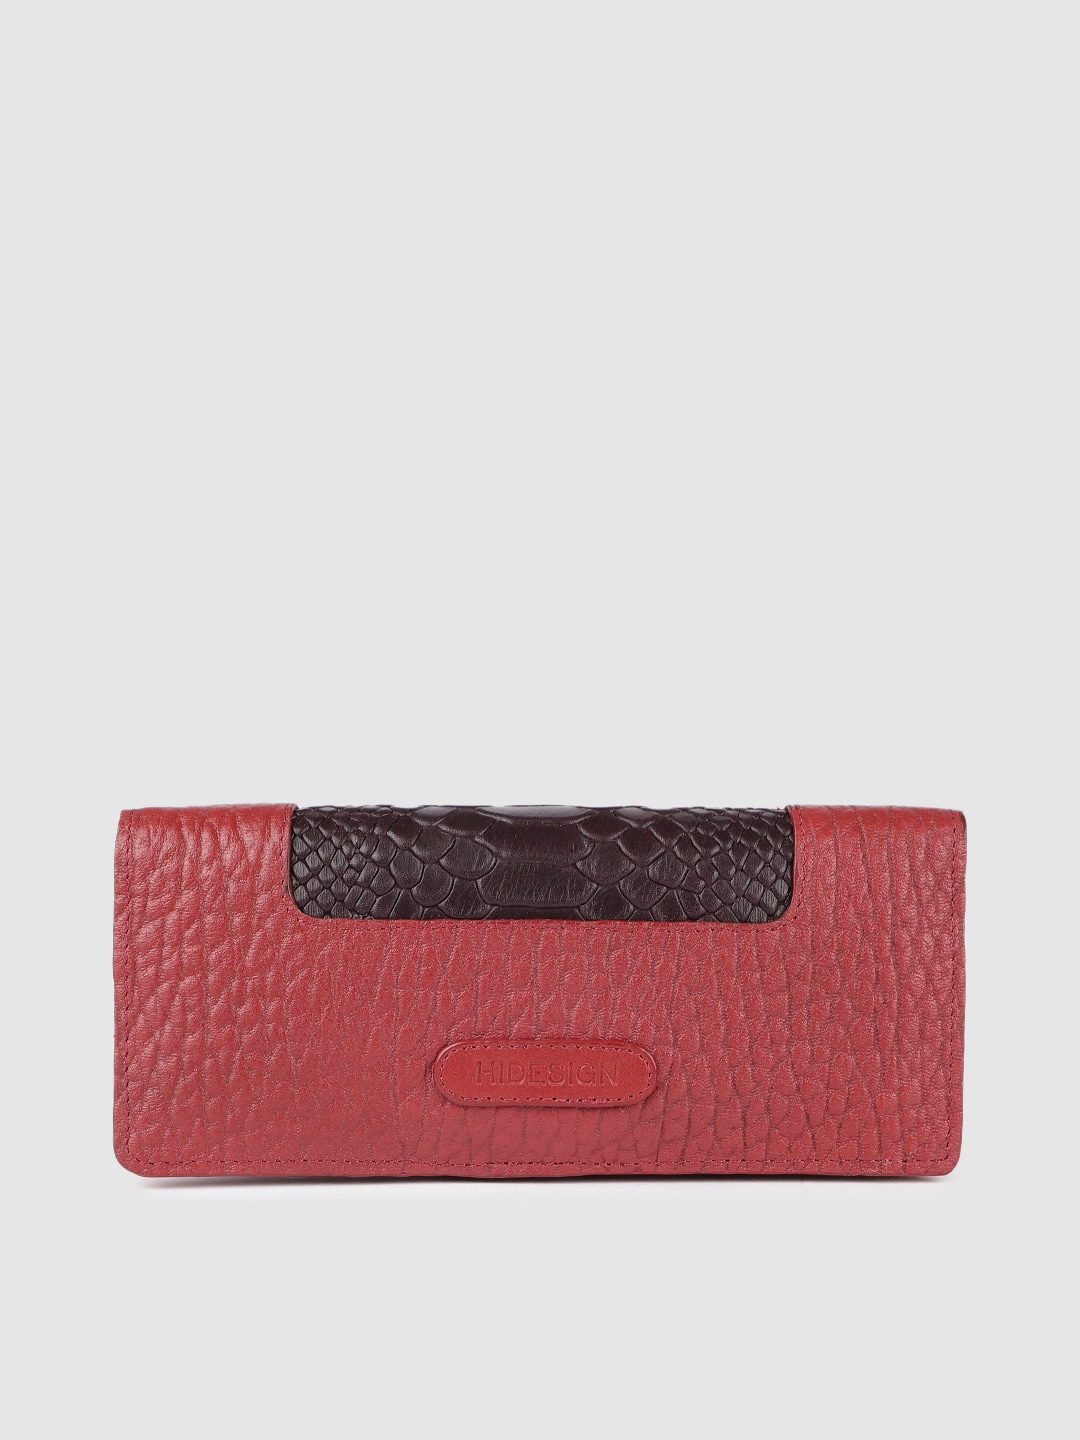 Hidesign Women Red Leather Textured Two Fold Wallet Price in India